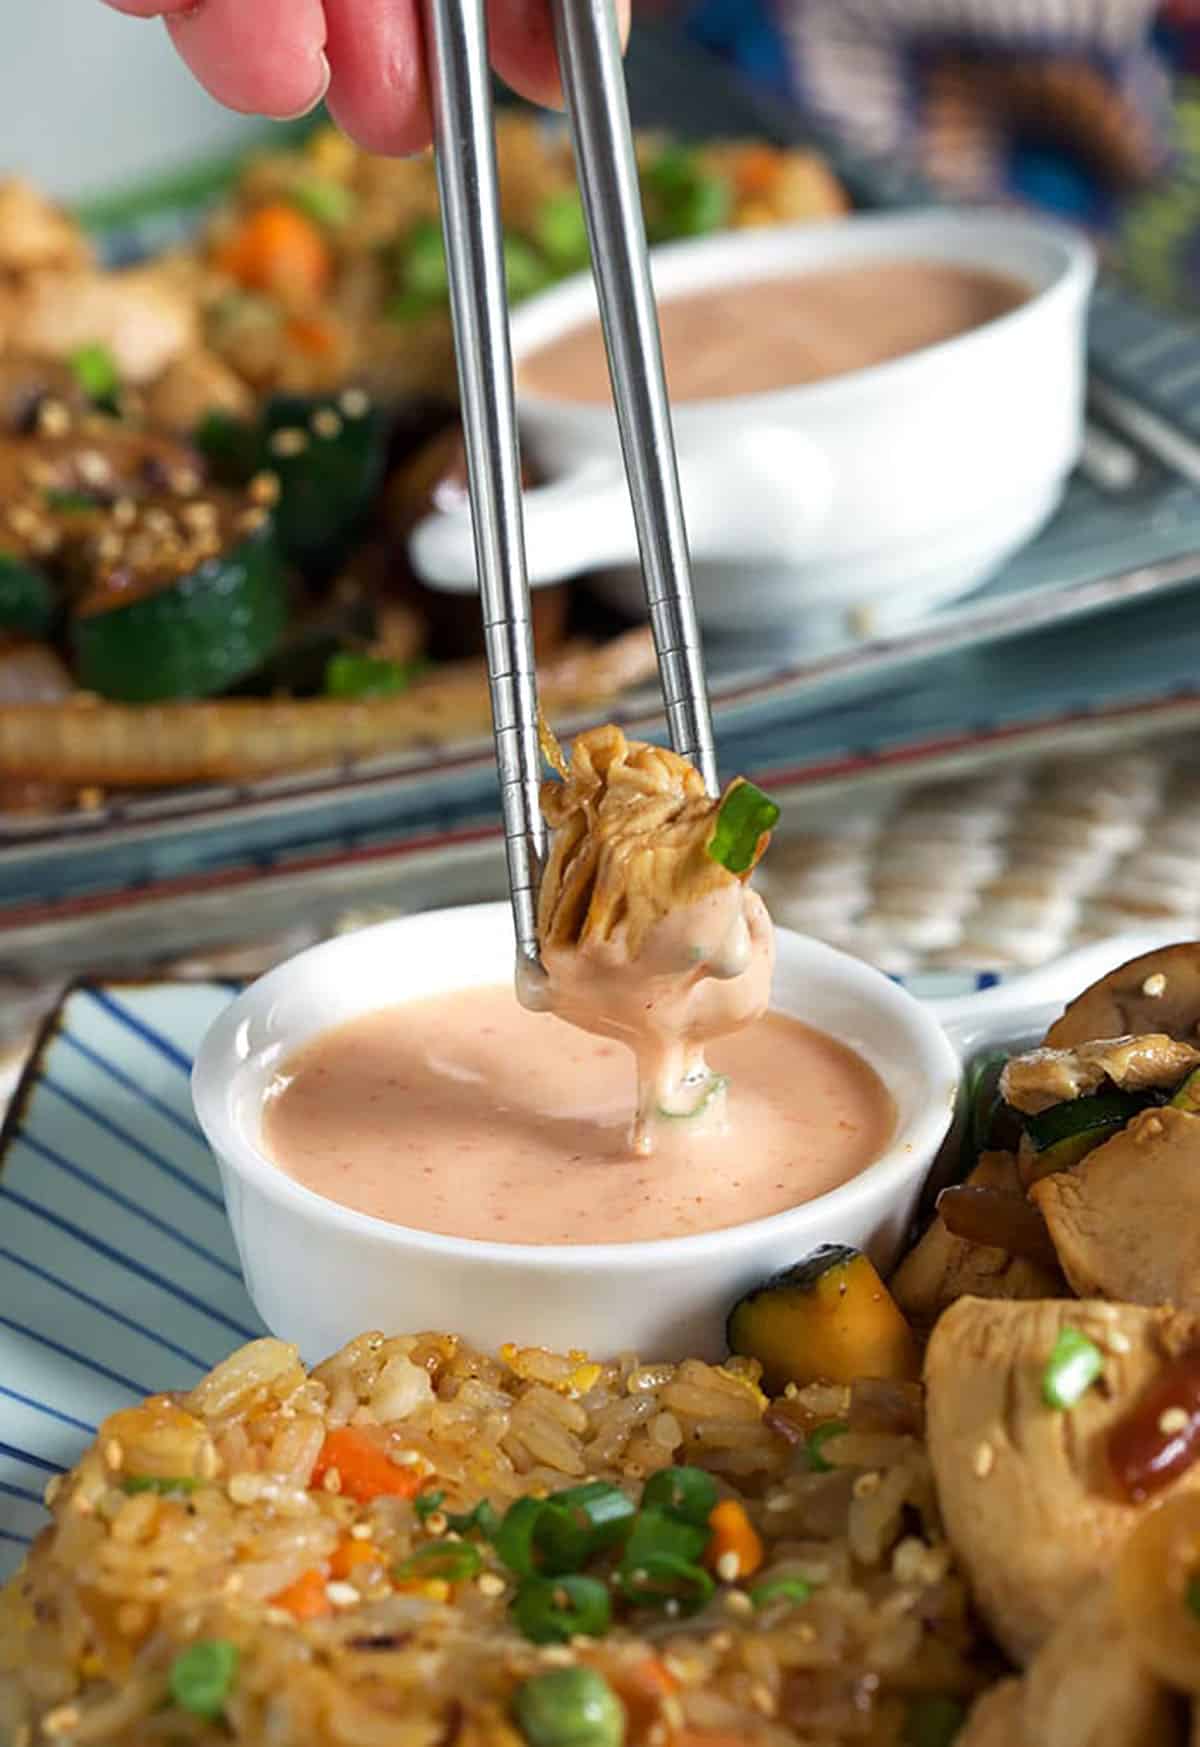 A piece of chicken is dipped into yum yum sauce.